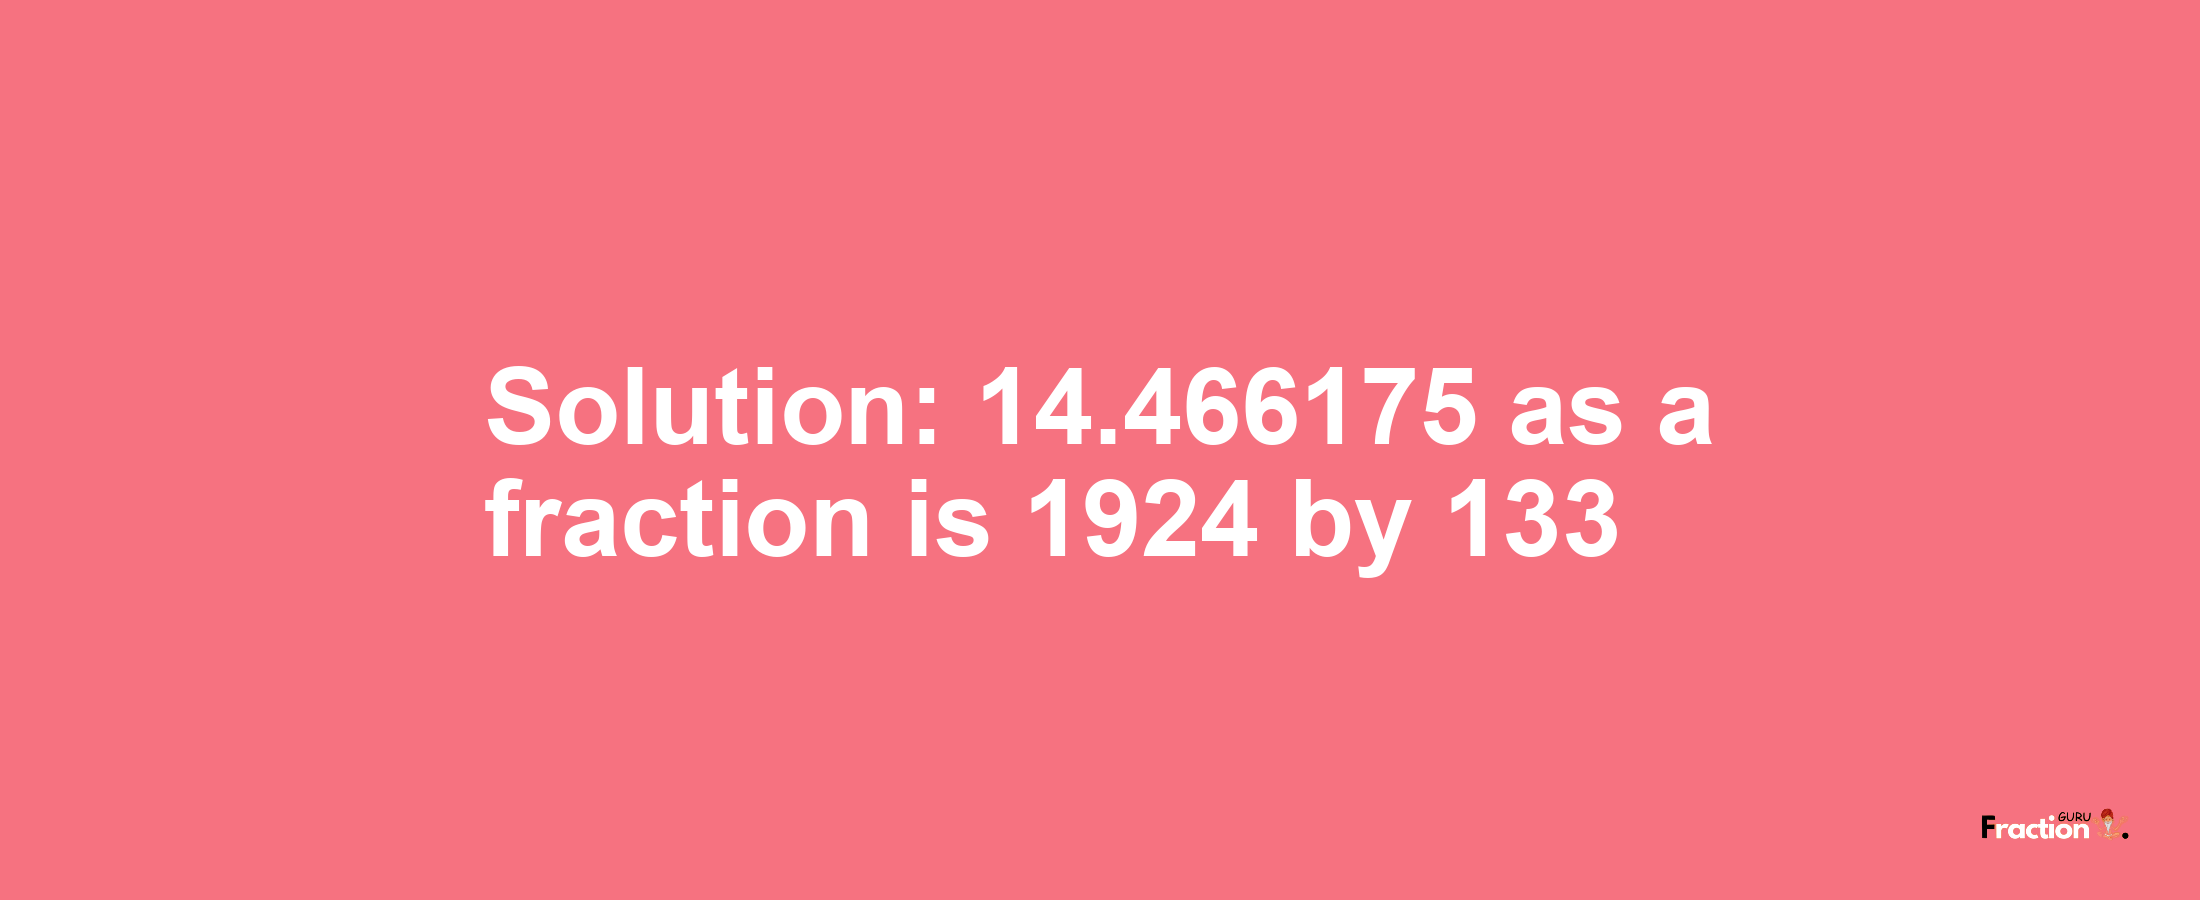 Solution:14.466175 as a fraction is 1924/133